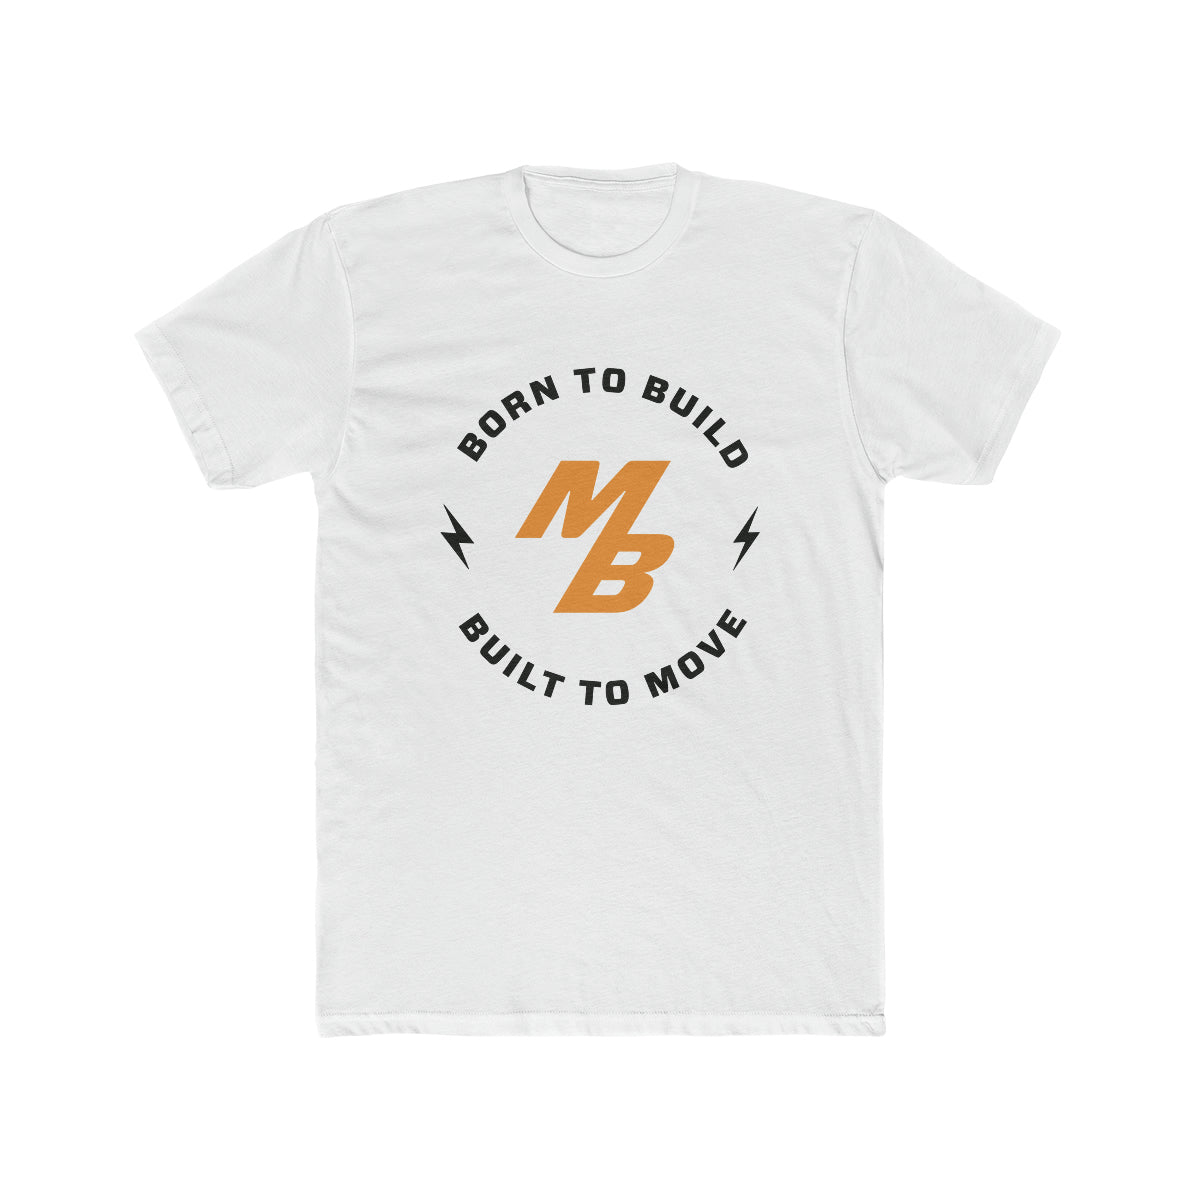 Born to Build Move Bumpers T-shirt- White